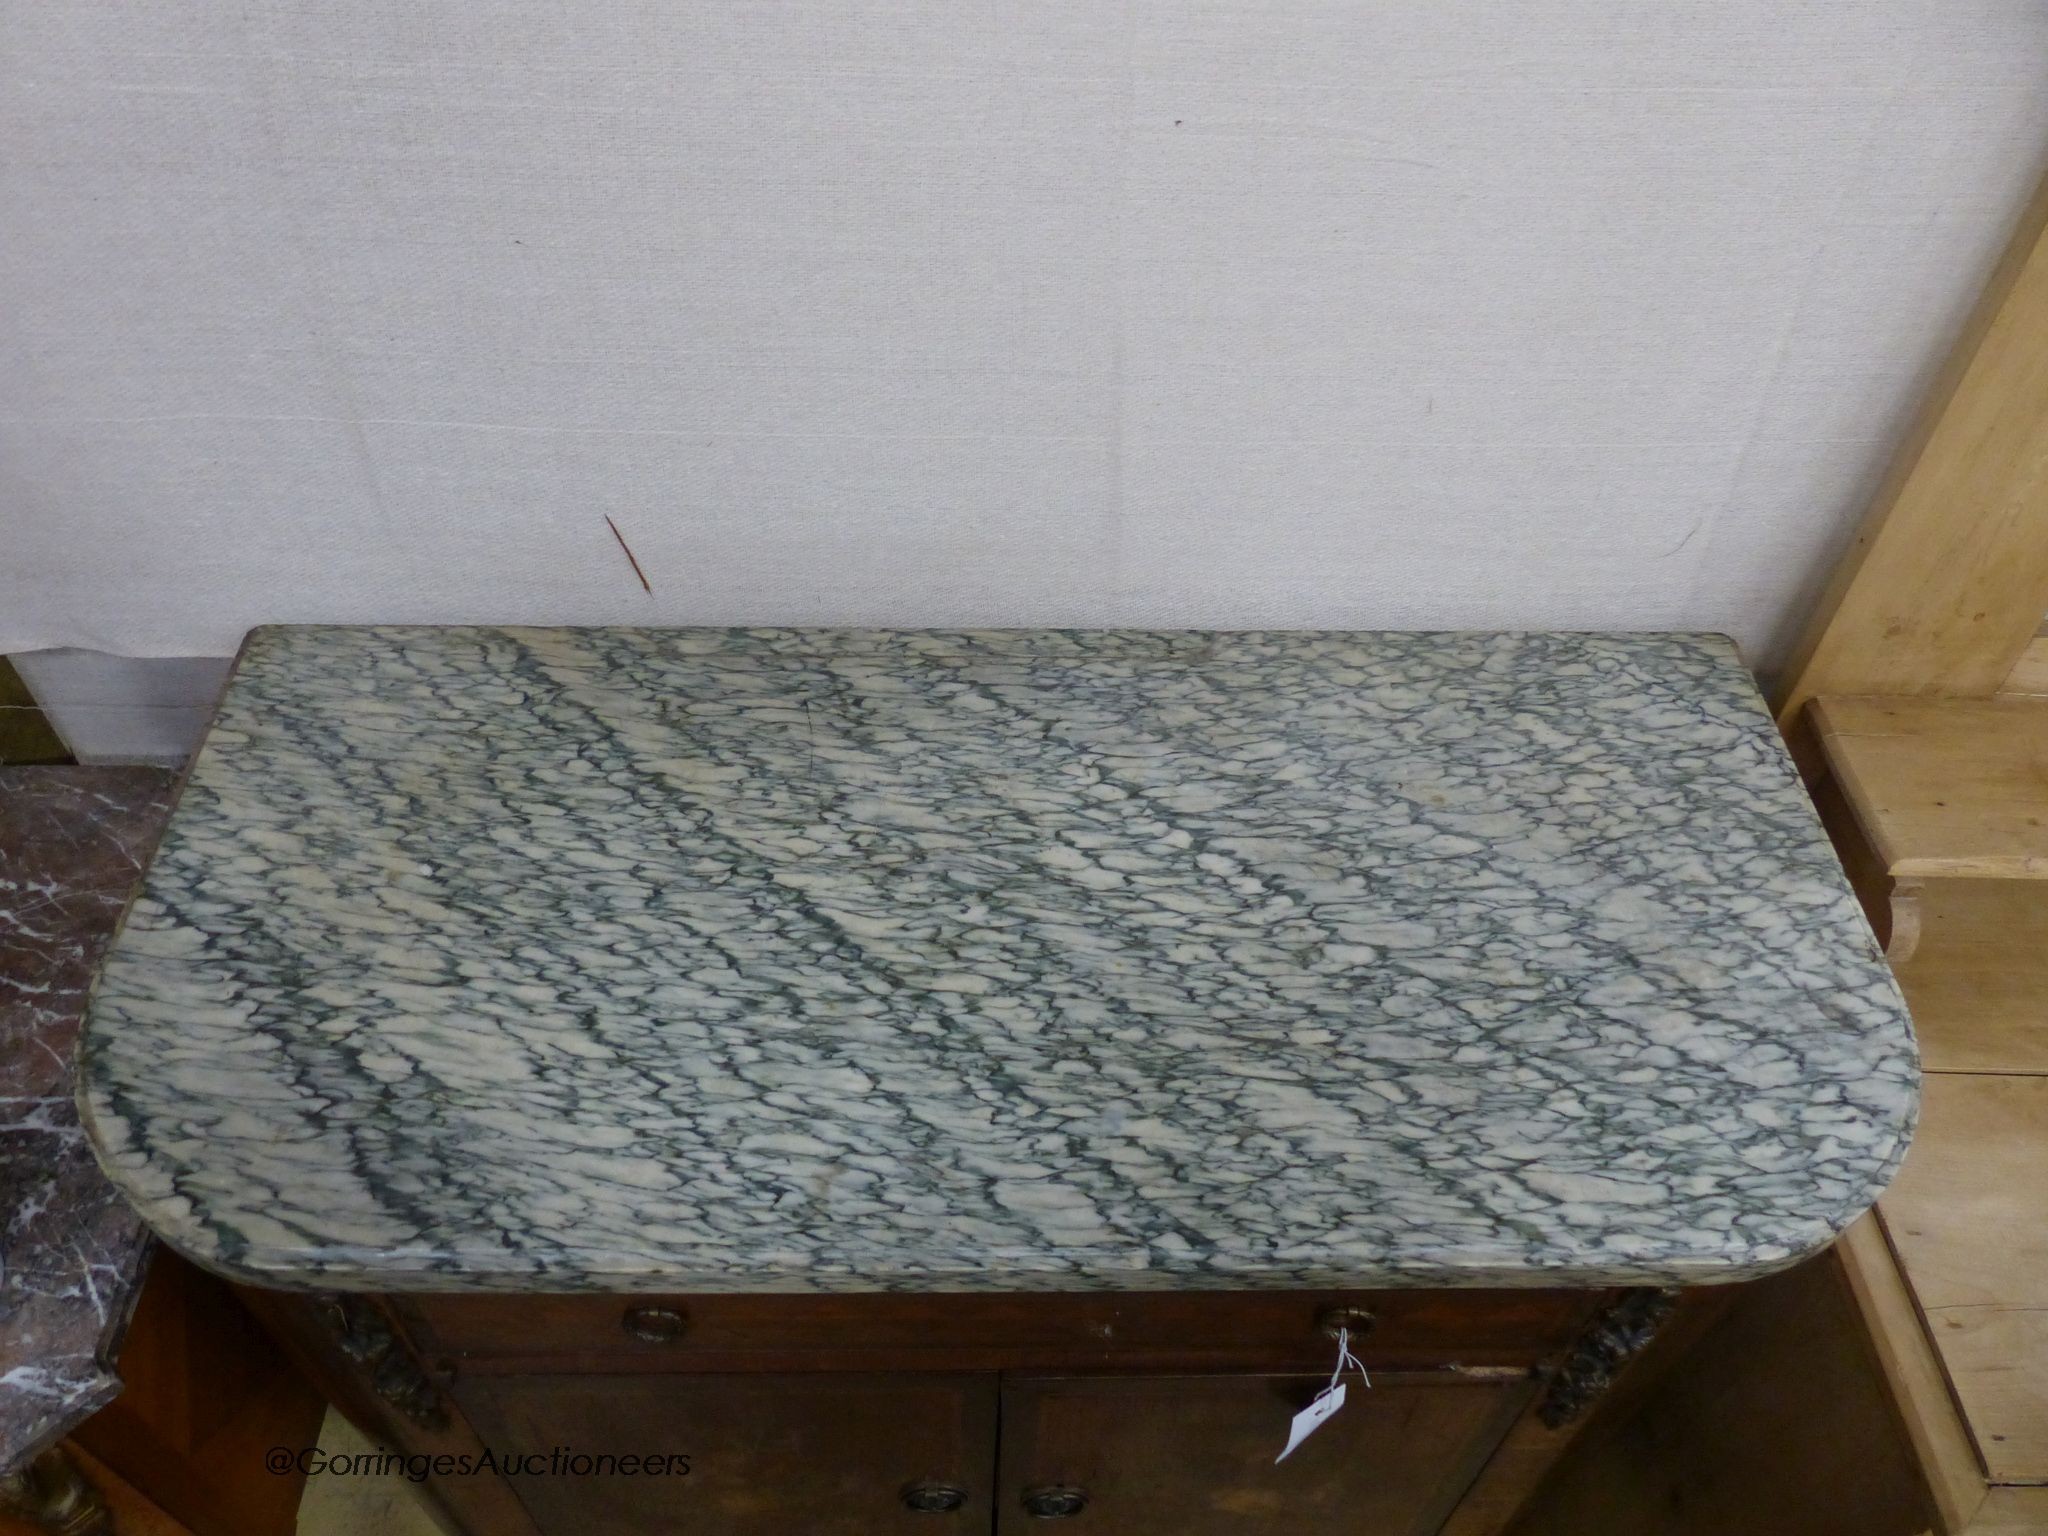 A French green marble topped commode, width 93cm, depth 41cm, height 92cm